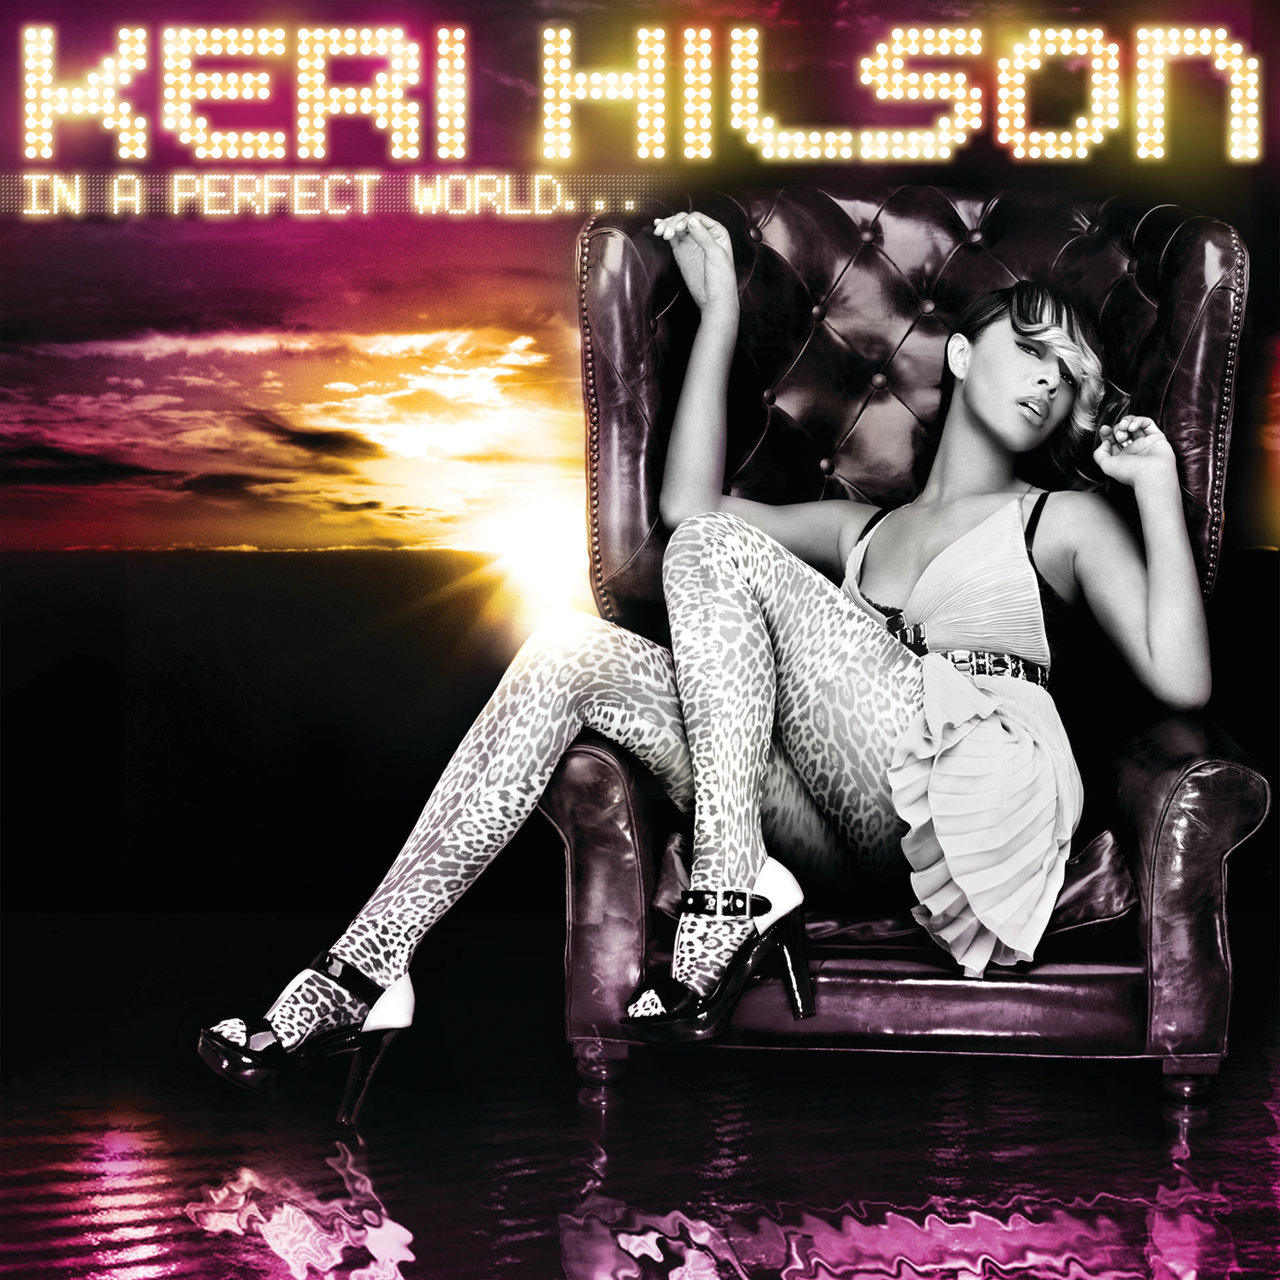 Keri Hilson - In A Perfect World… (Cover)